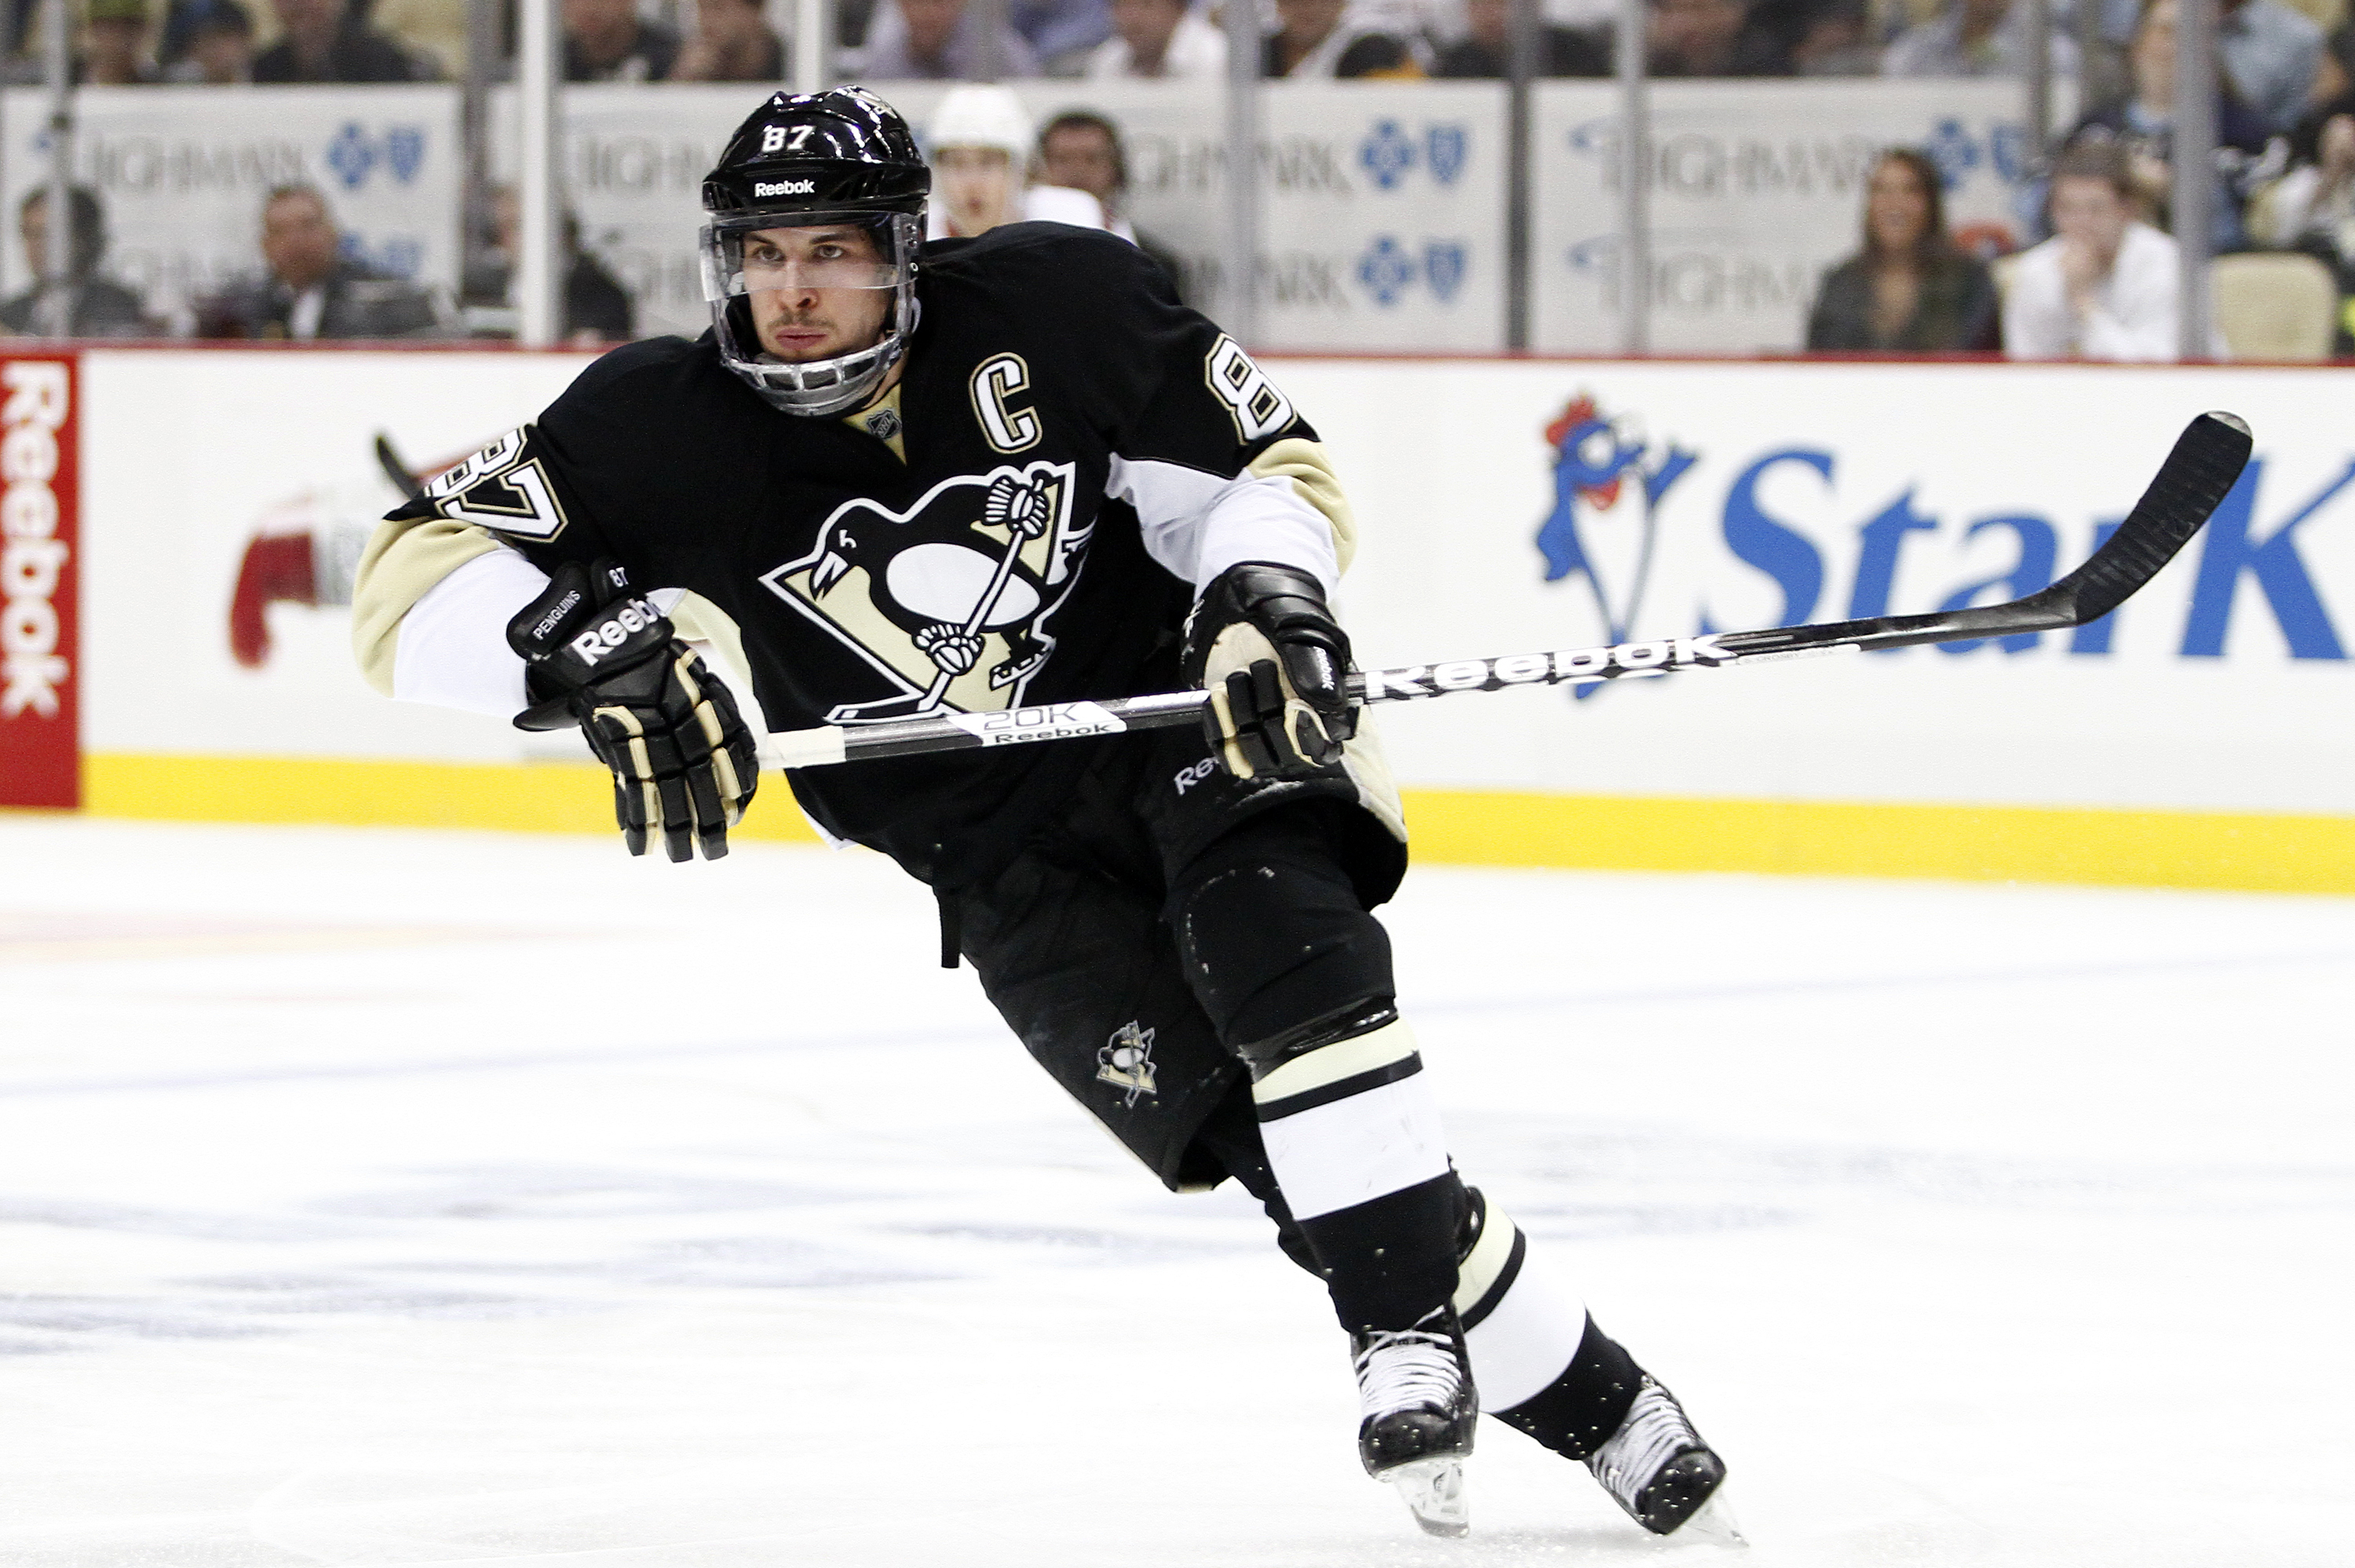 Penguins PR on X: With two points tonight, Sidney Crosby now has